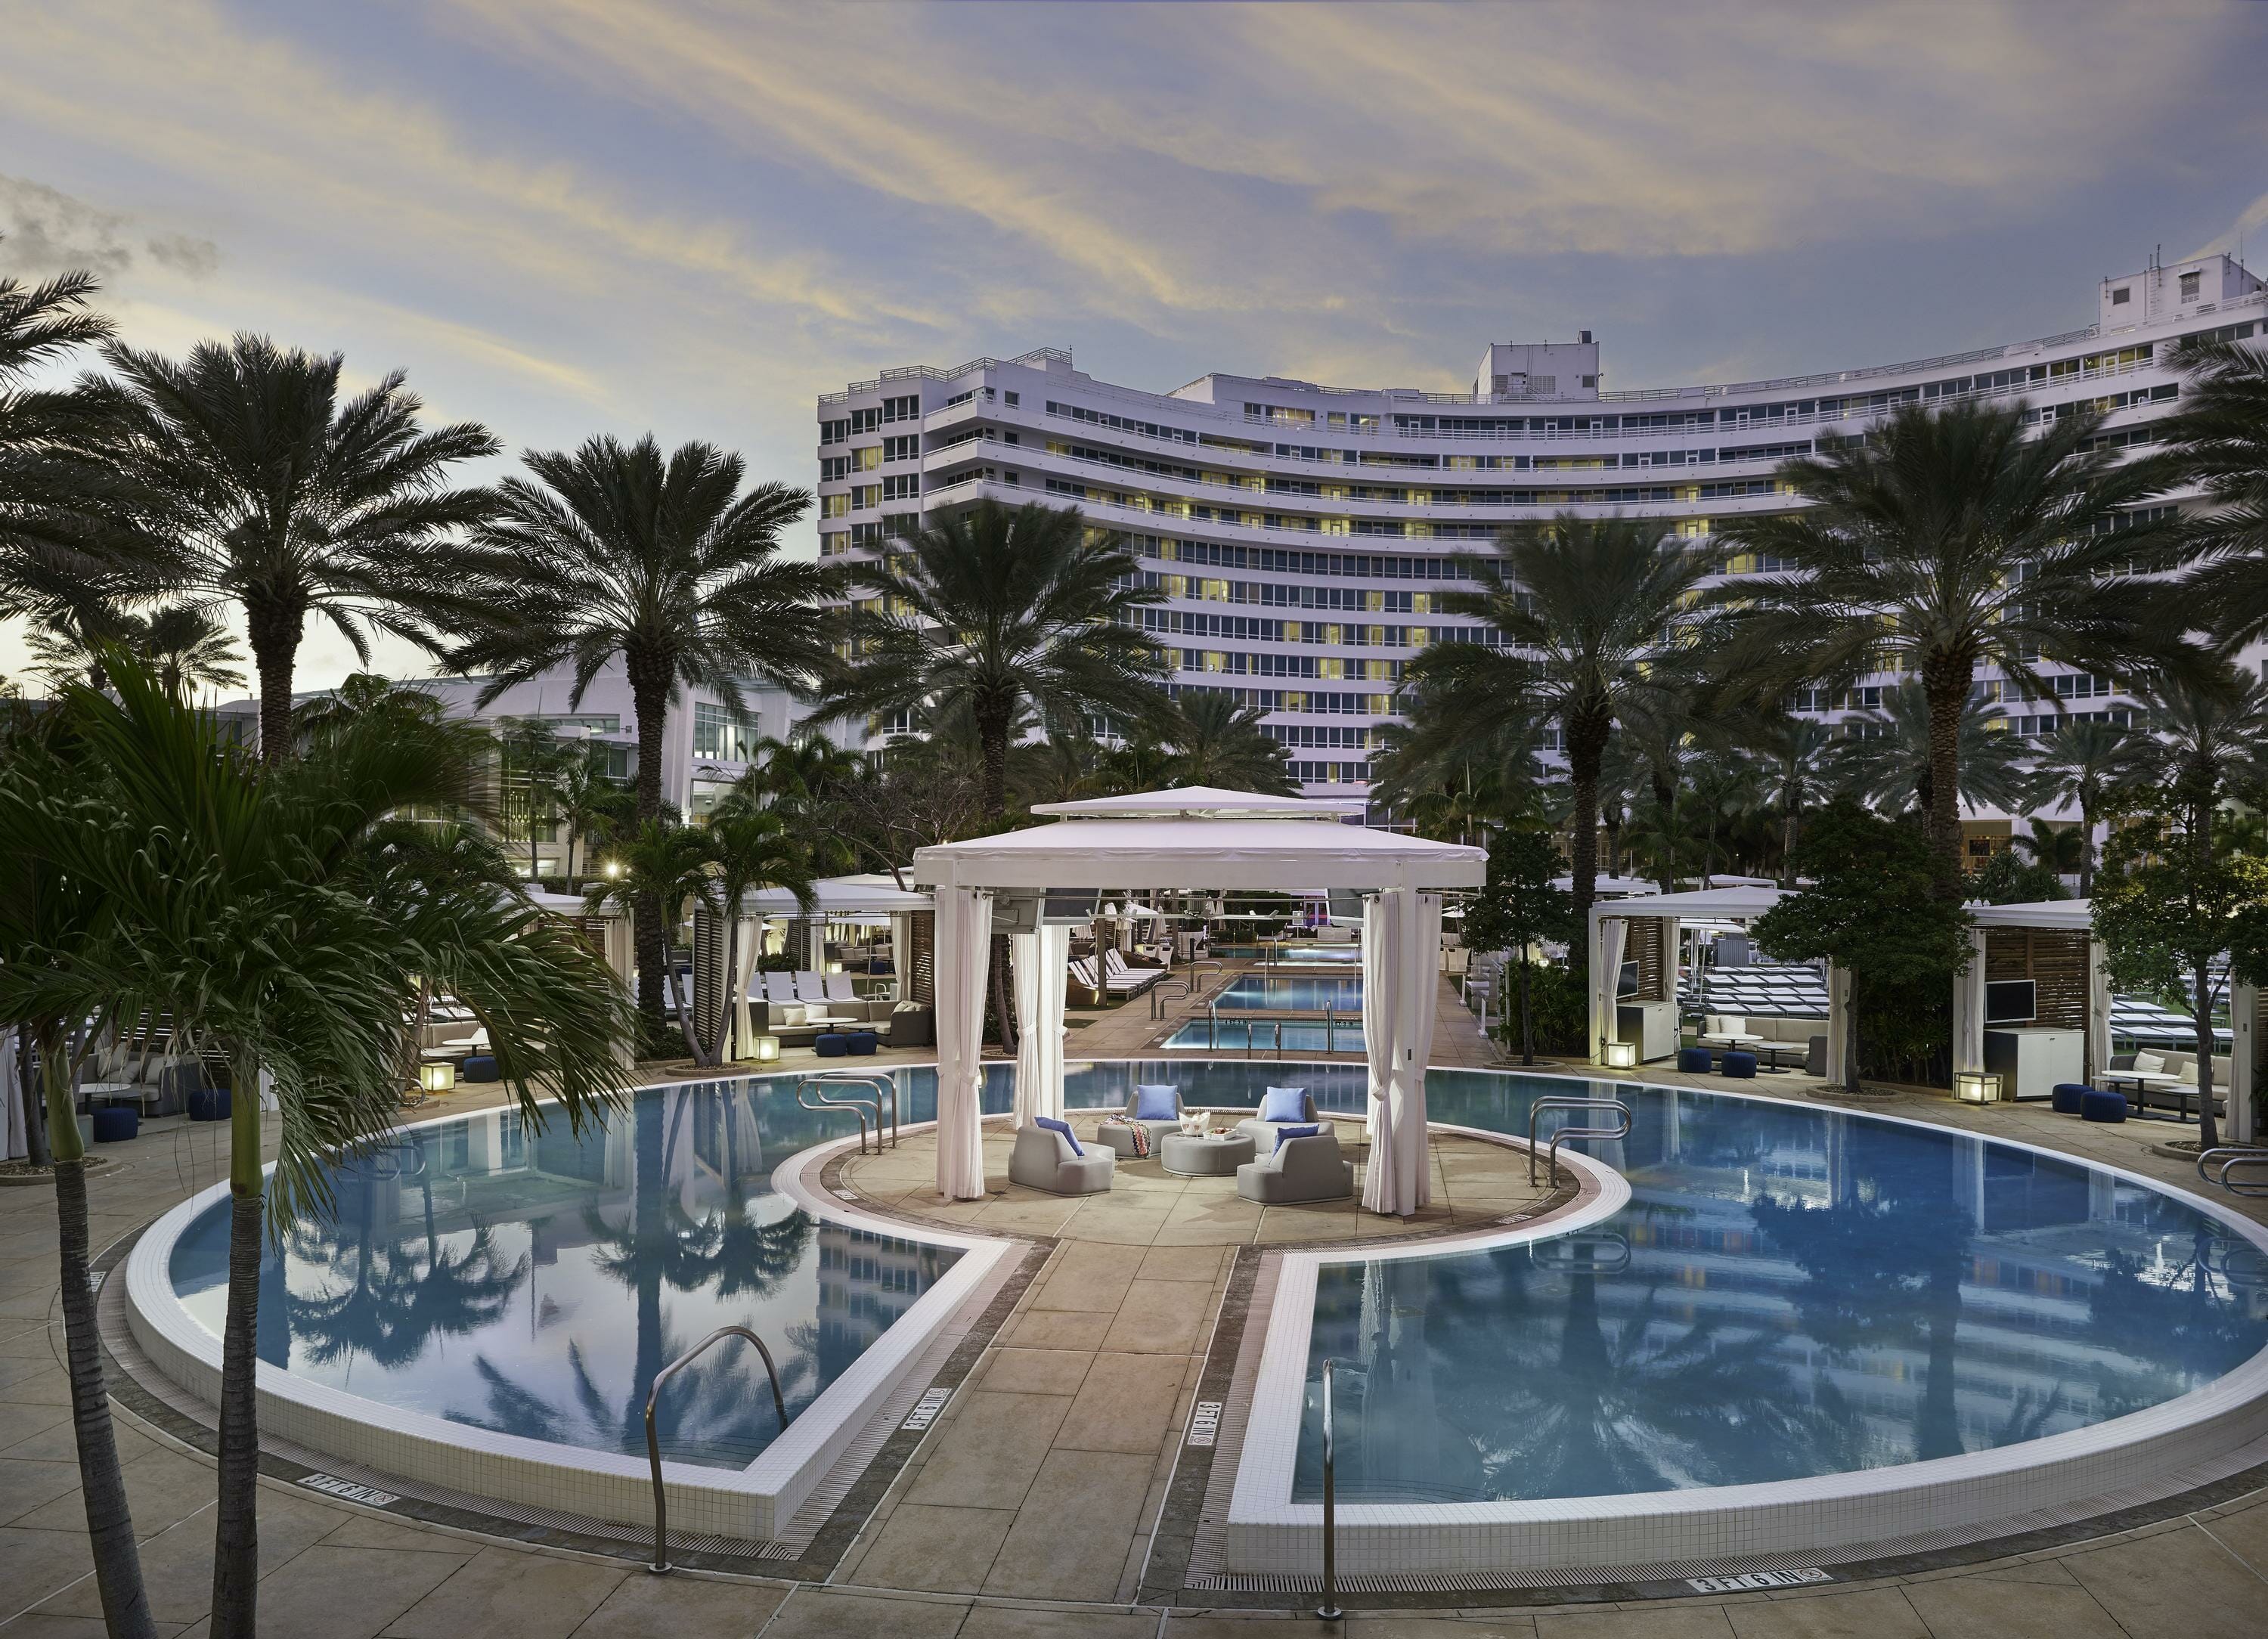 Pool view of Fontainebleau Miami Beach